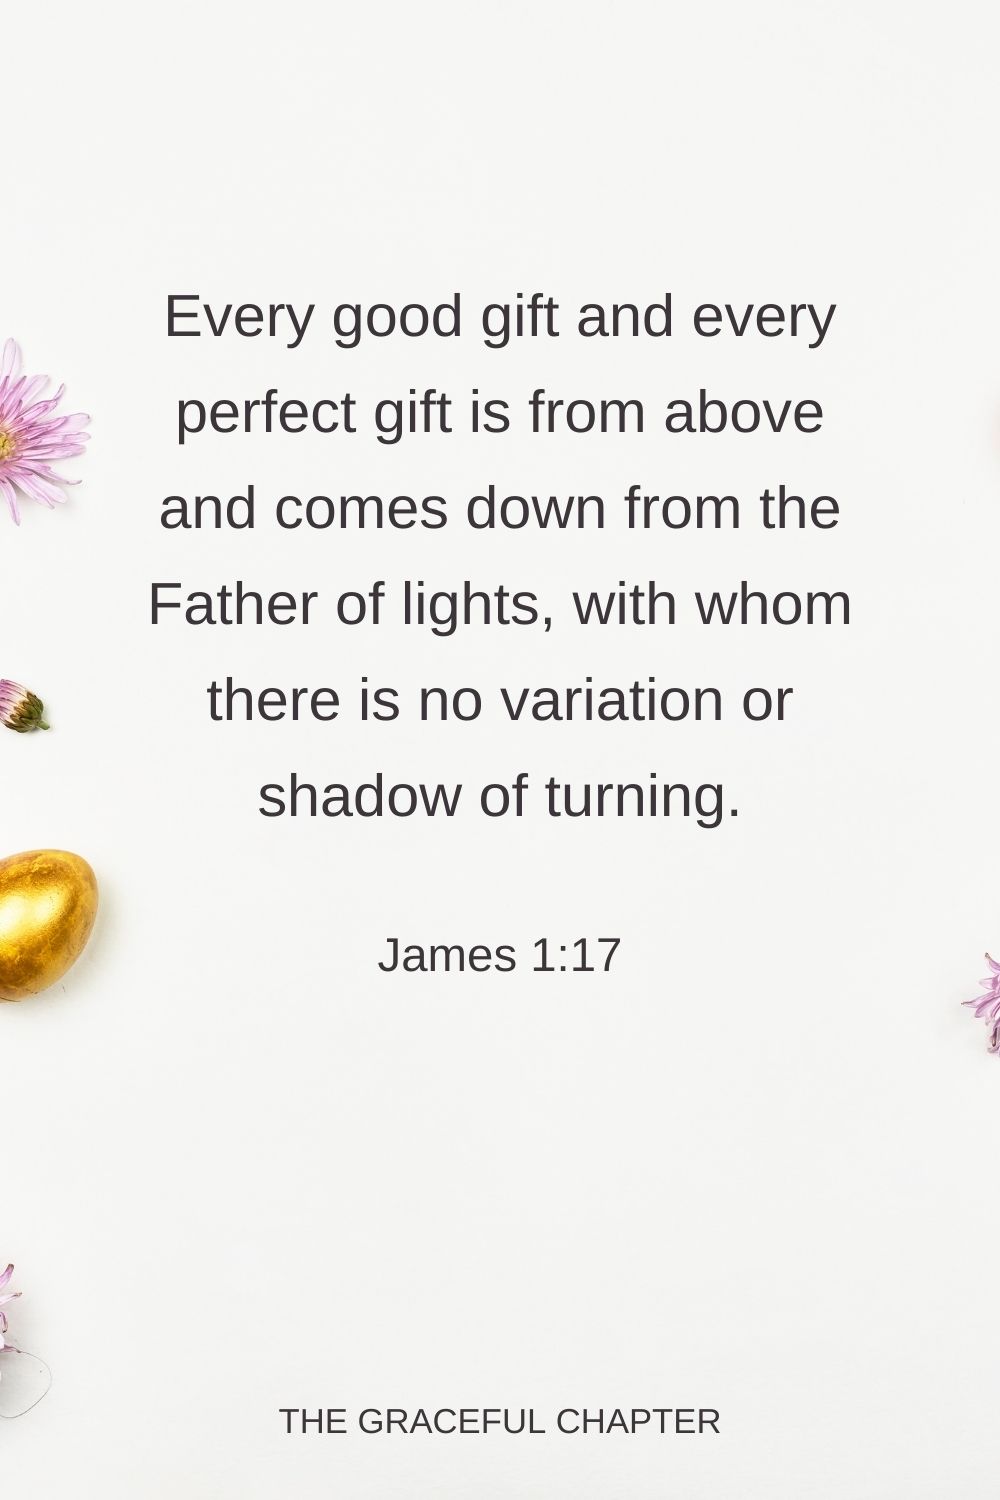 Every good gift and every perfect gift is from above, and comes down from the Father of lights, with whom there is no variation or shadow of turning. James 1:17